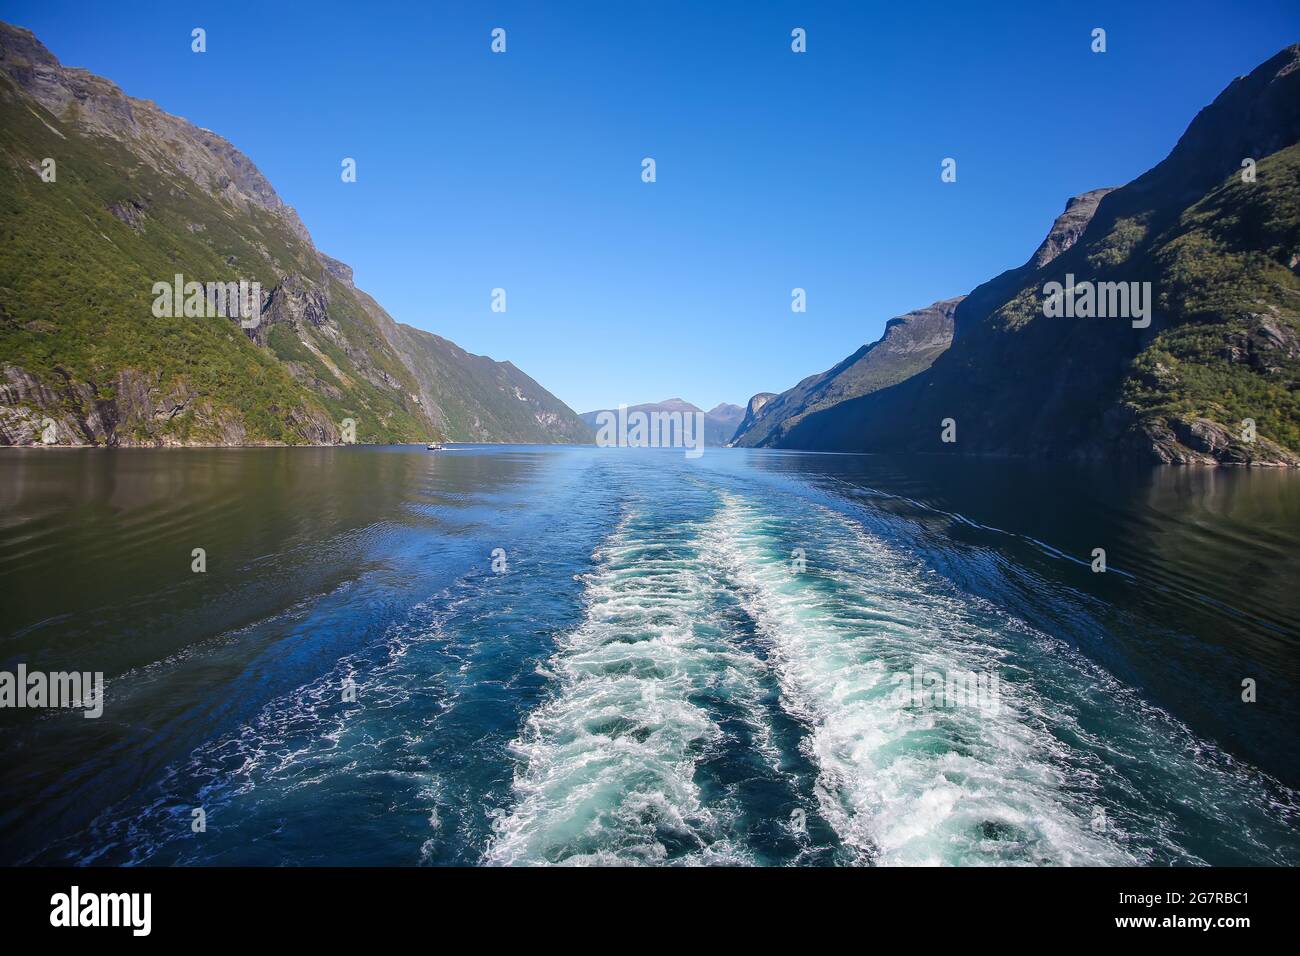 Wake of the ship while scenic cruising down Geiranger fjord. Beautiful landscape with reflections of the mountains in the water on a calm summer day, Stock Photo